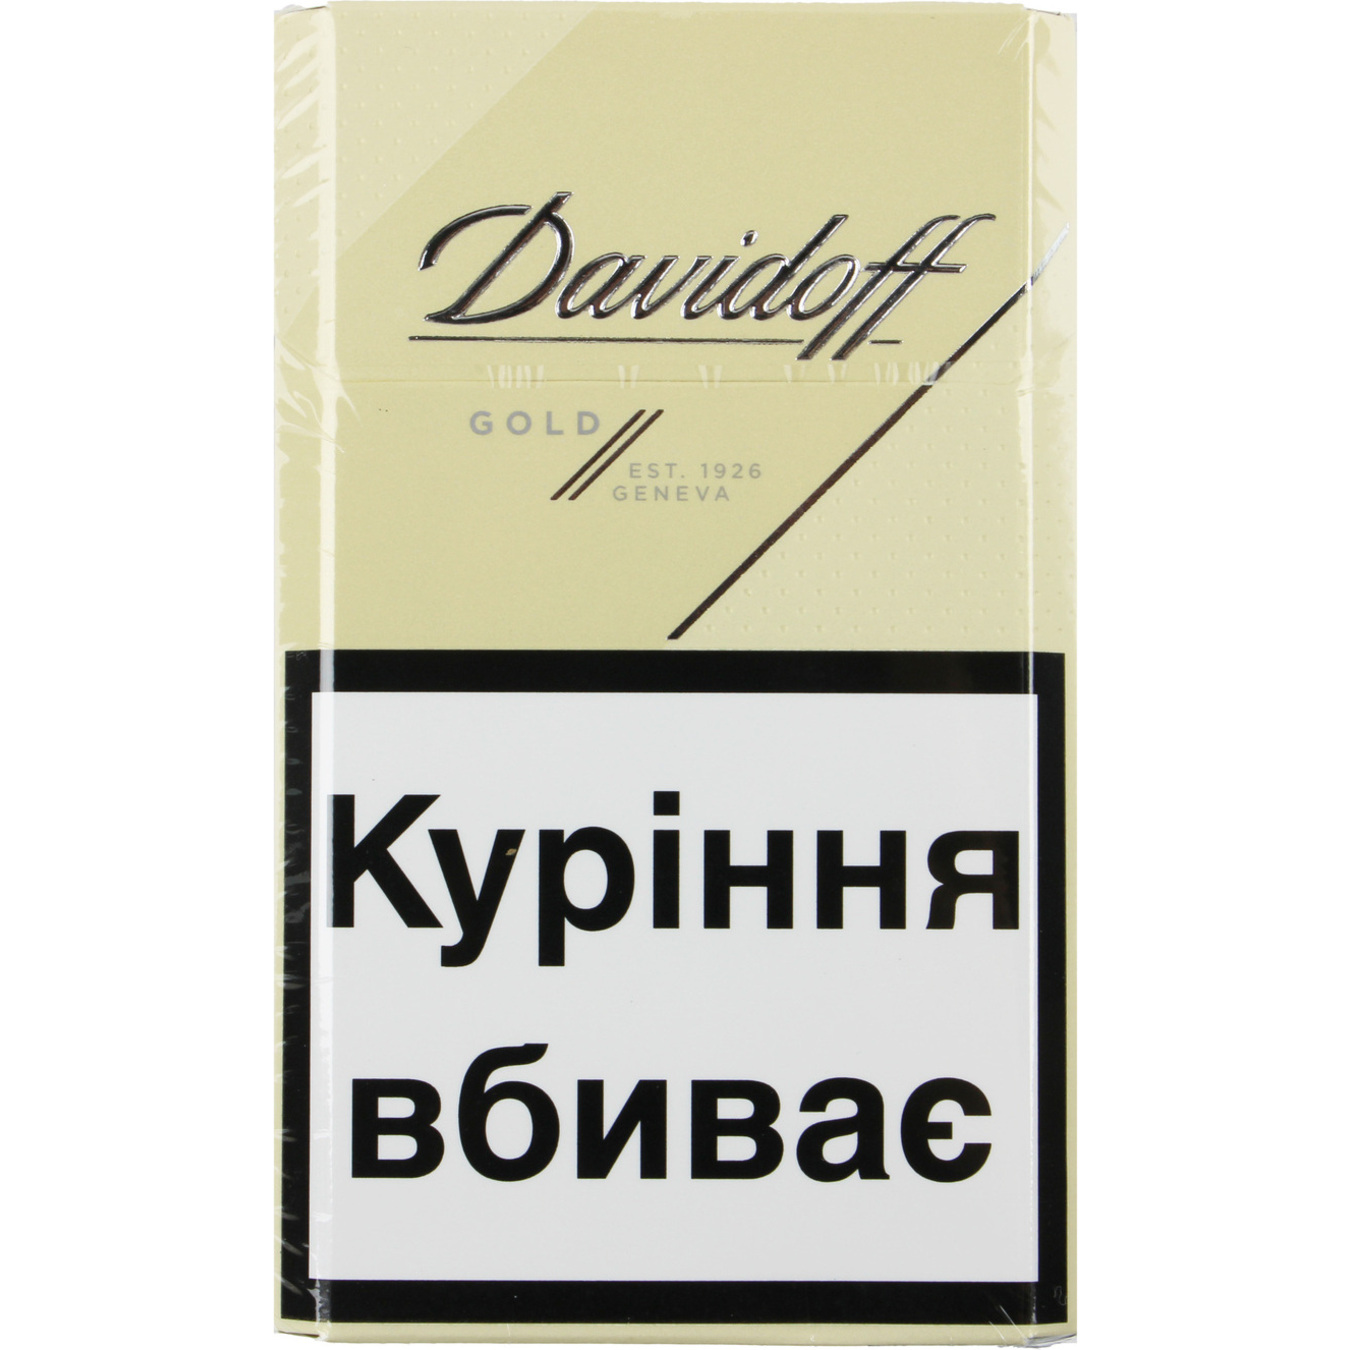 Davidoff Gold Cigarettes 20 pcs (the price is indicated without excise tax)